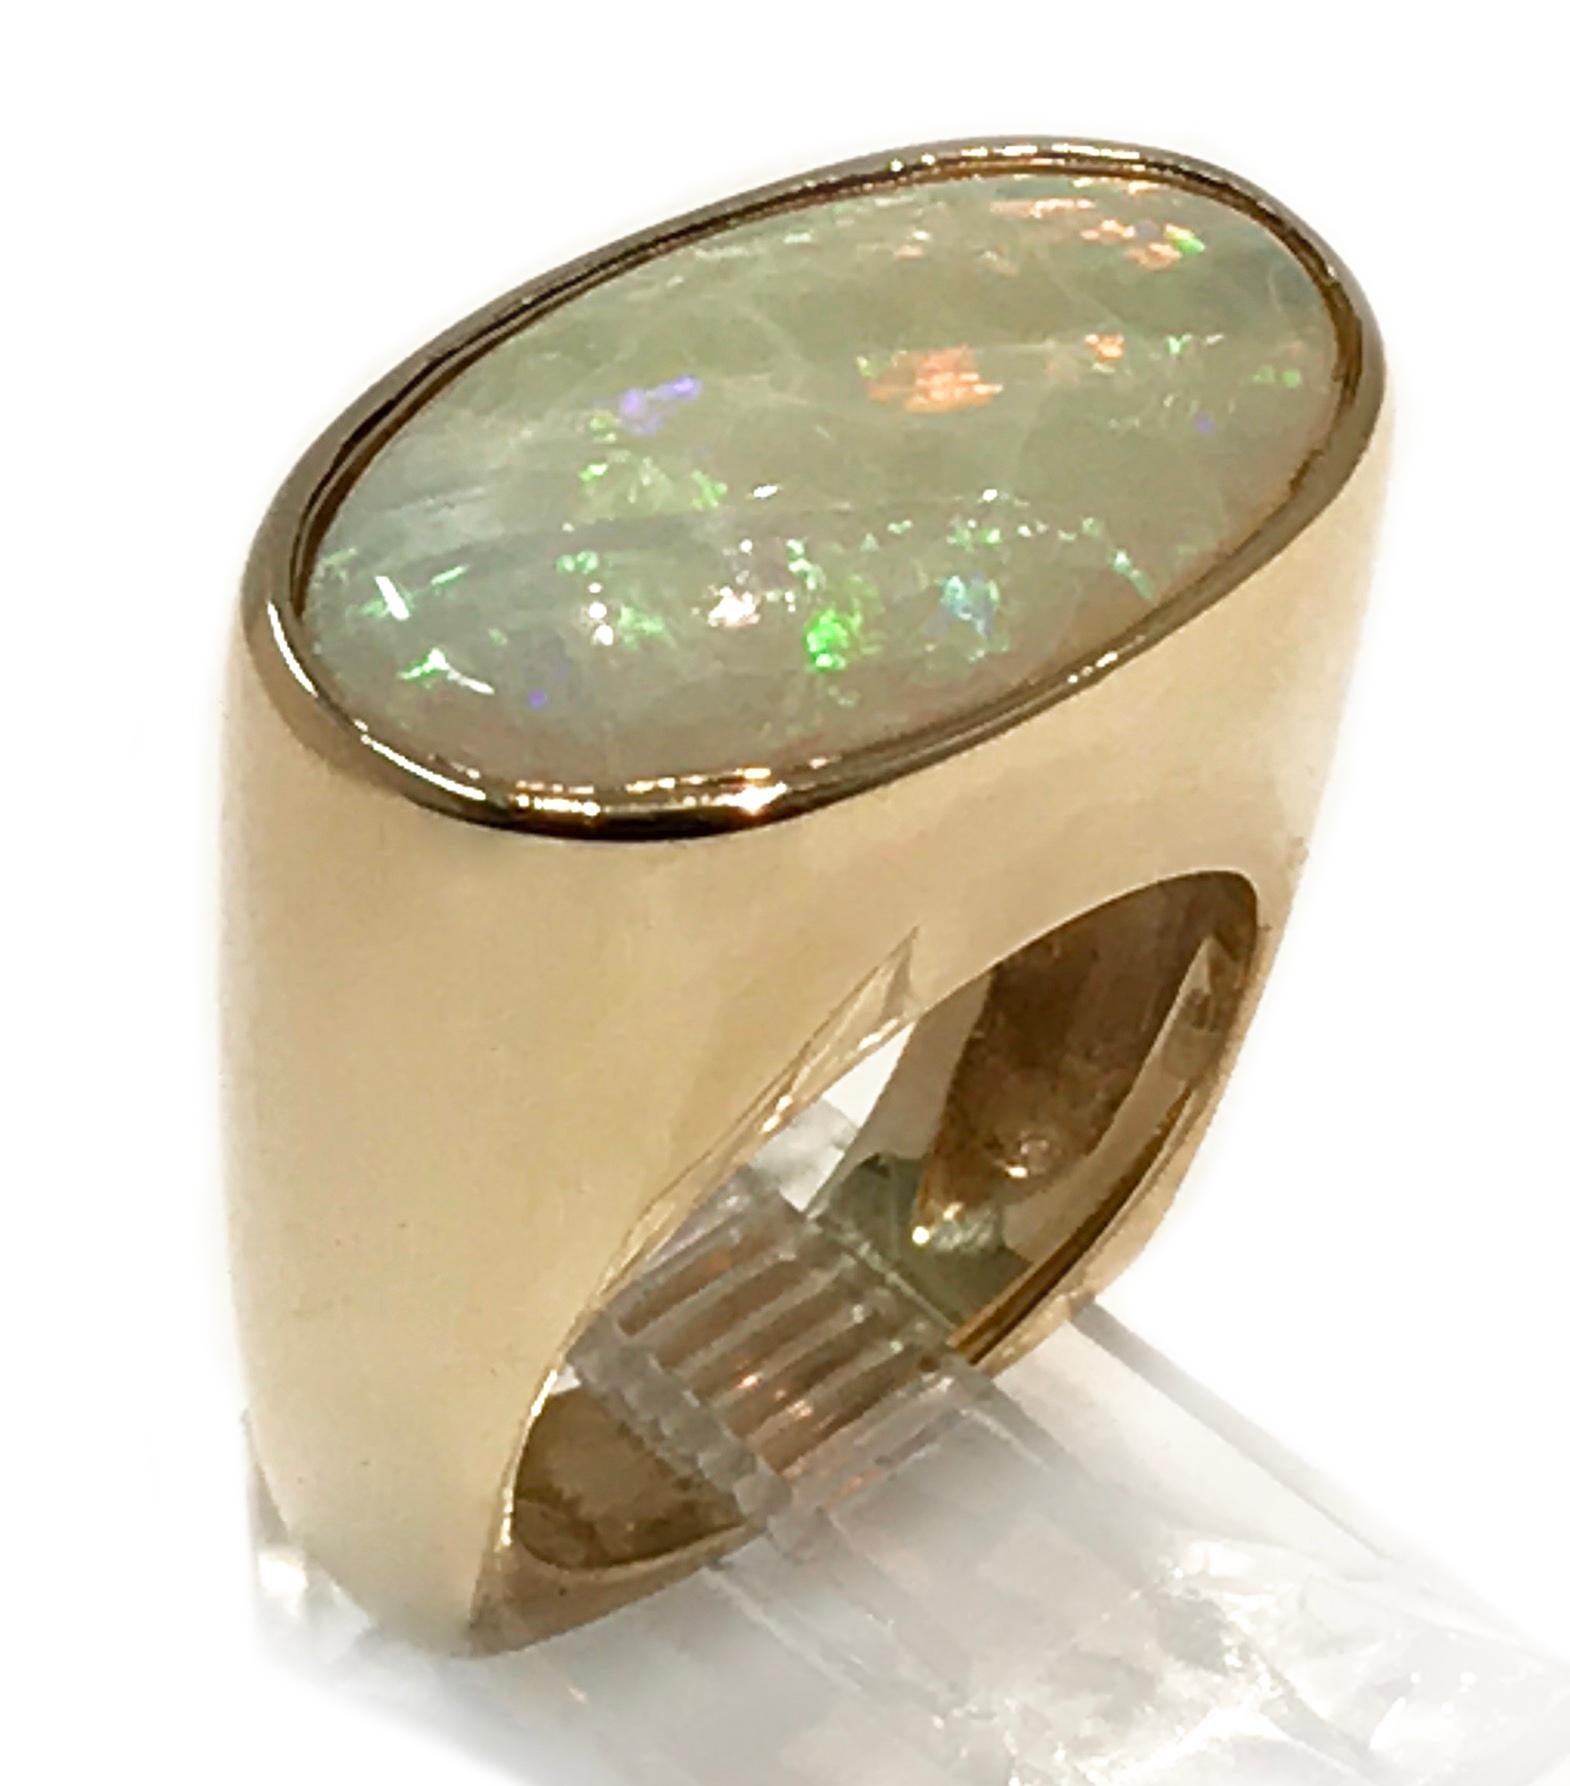 Vintage Opal 14k Yellow Gold Wide Band Ring. There are glorious bursts of colors in this large bezel-set oval Opal, a true statement piece. The ring is size 7. The ring has a total weight of 16.89 grams.